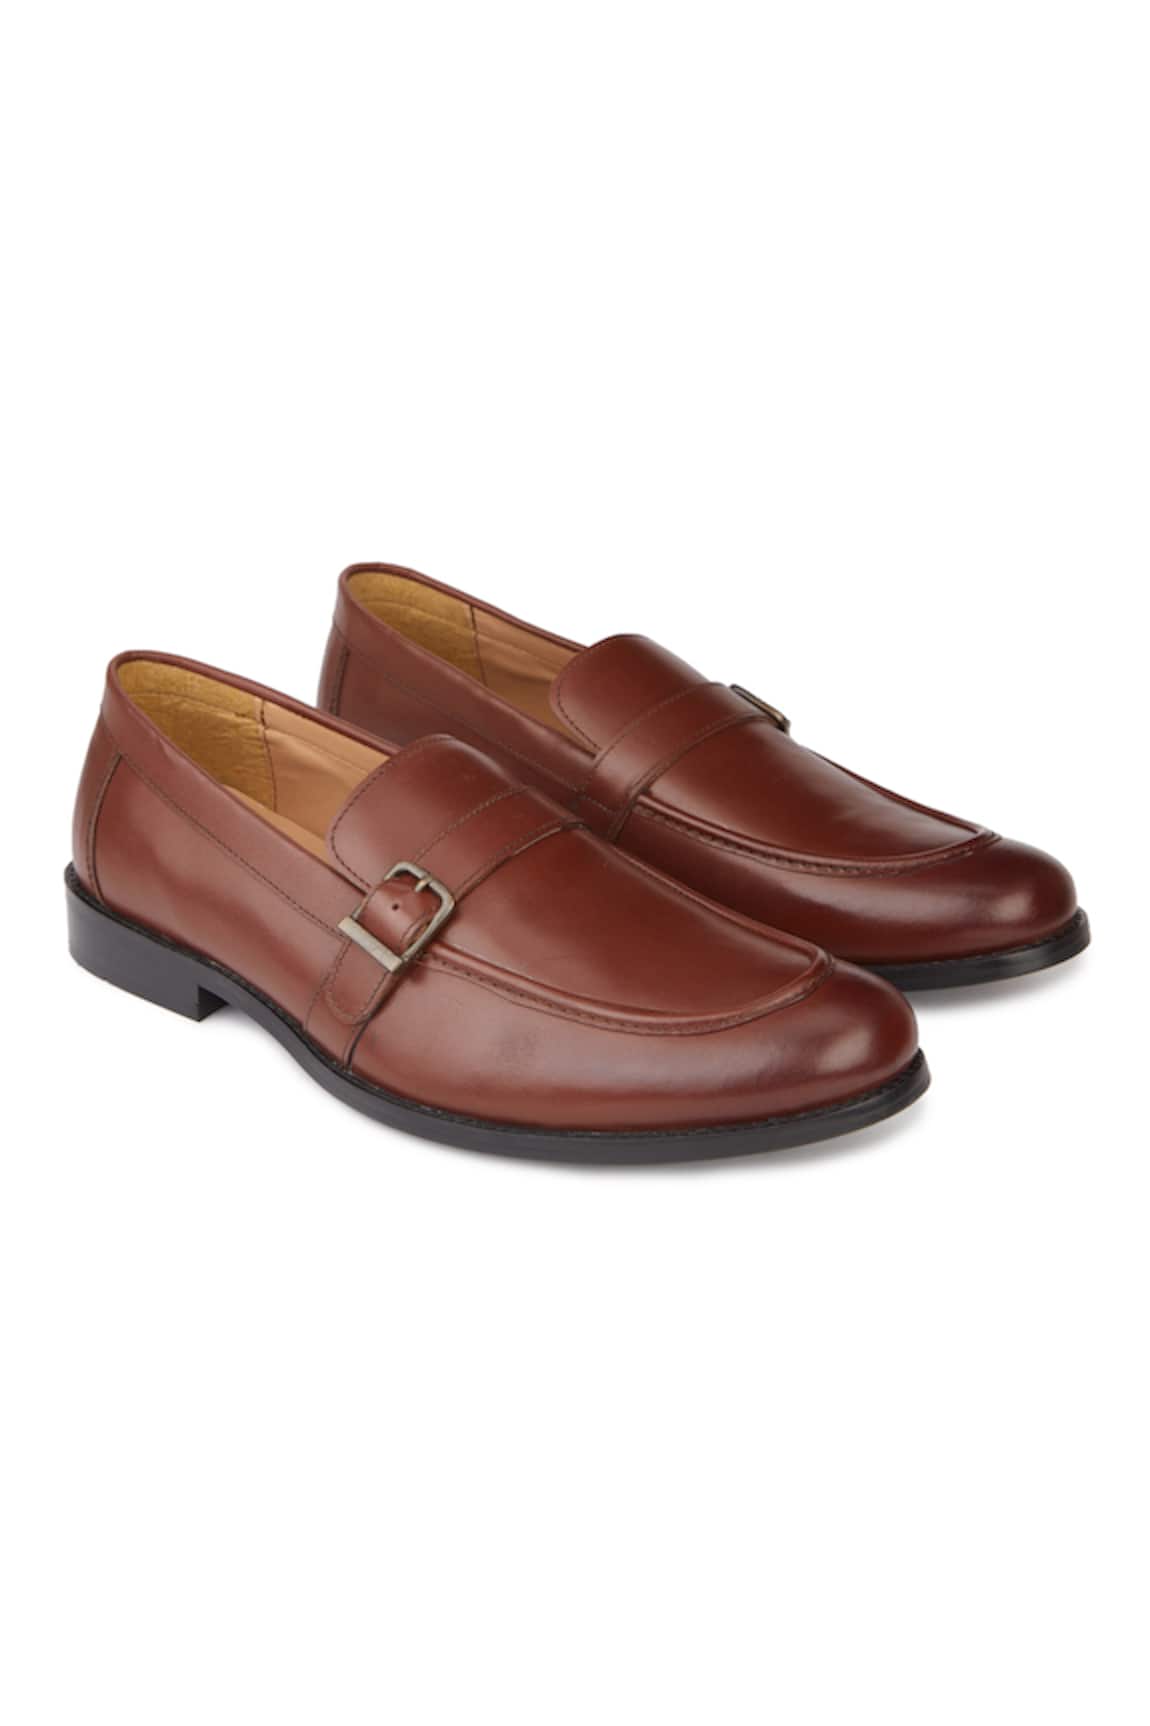 Hats Off Accessories Genuine Leather Monk Penny Loafers